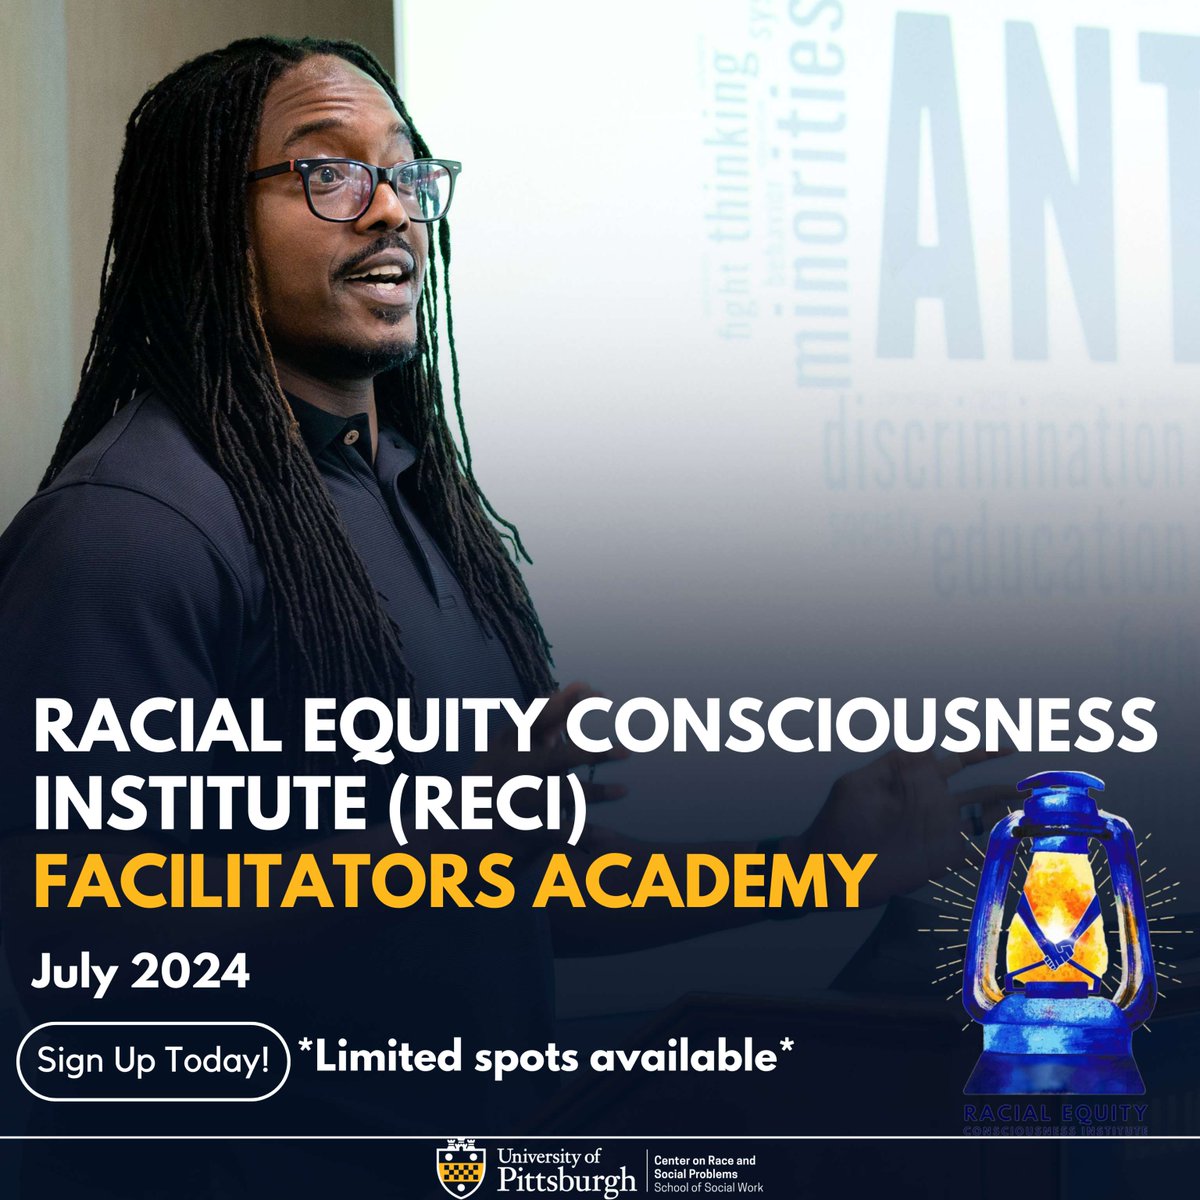 @PittCRSP is excited to announce that general registration for the July 2024 Racial Equity Consciousness Institute (RECI) Facilitators Academy is now open! Visit their website to learn more and register: crsp.pitt.edu/reci-facilitat…